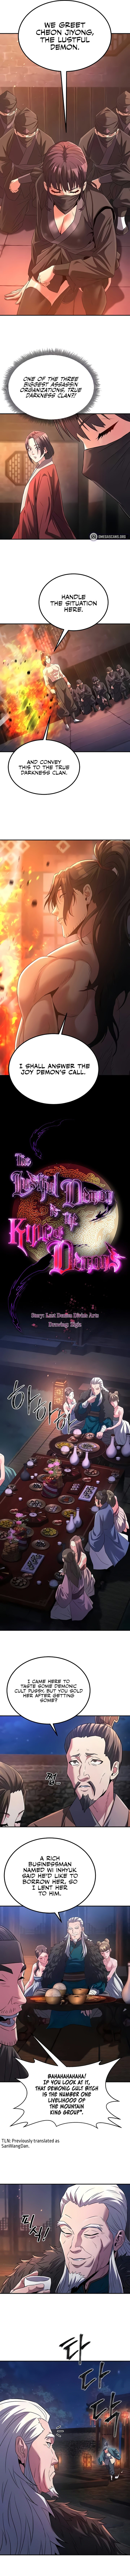 The Lustful Demon is the King of Demons - Chapter 12 Page 5